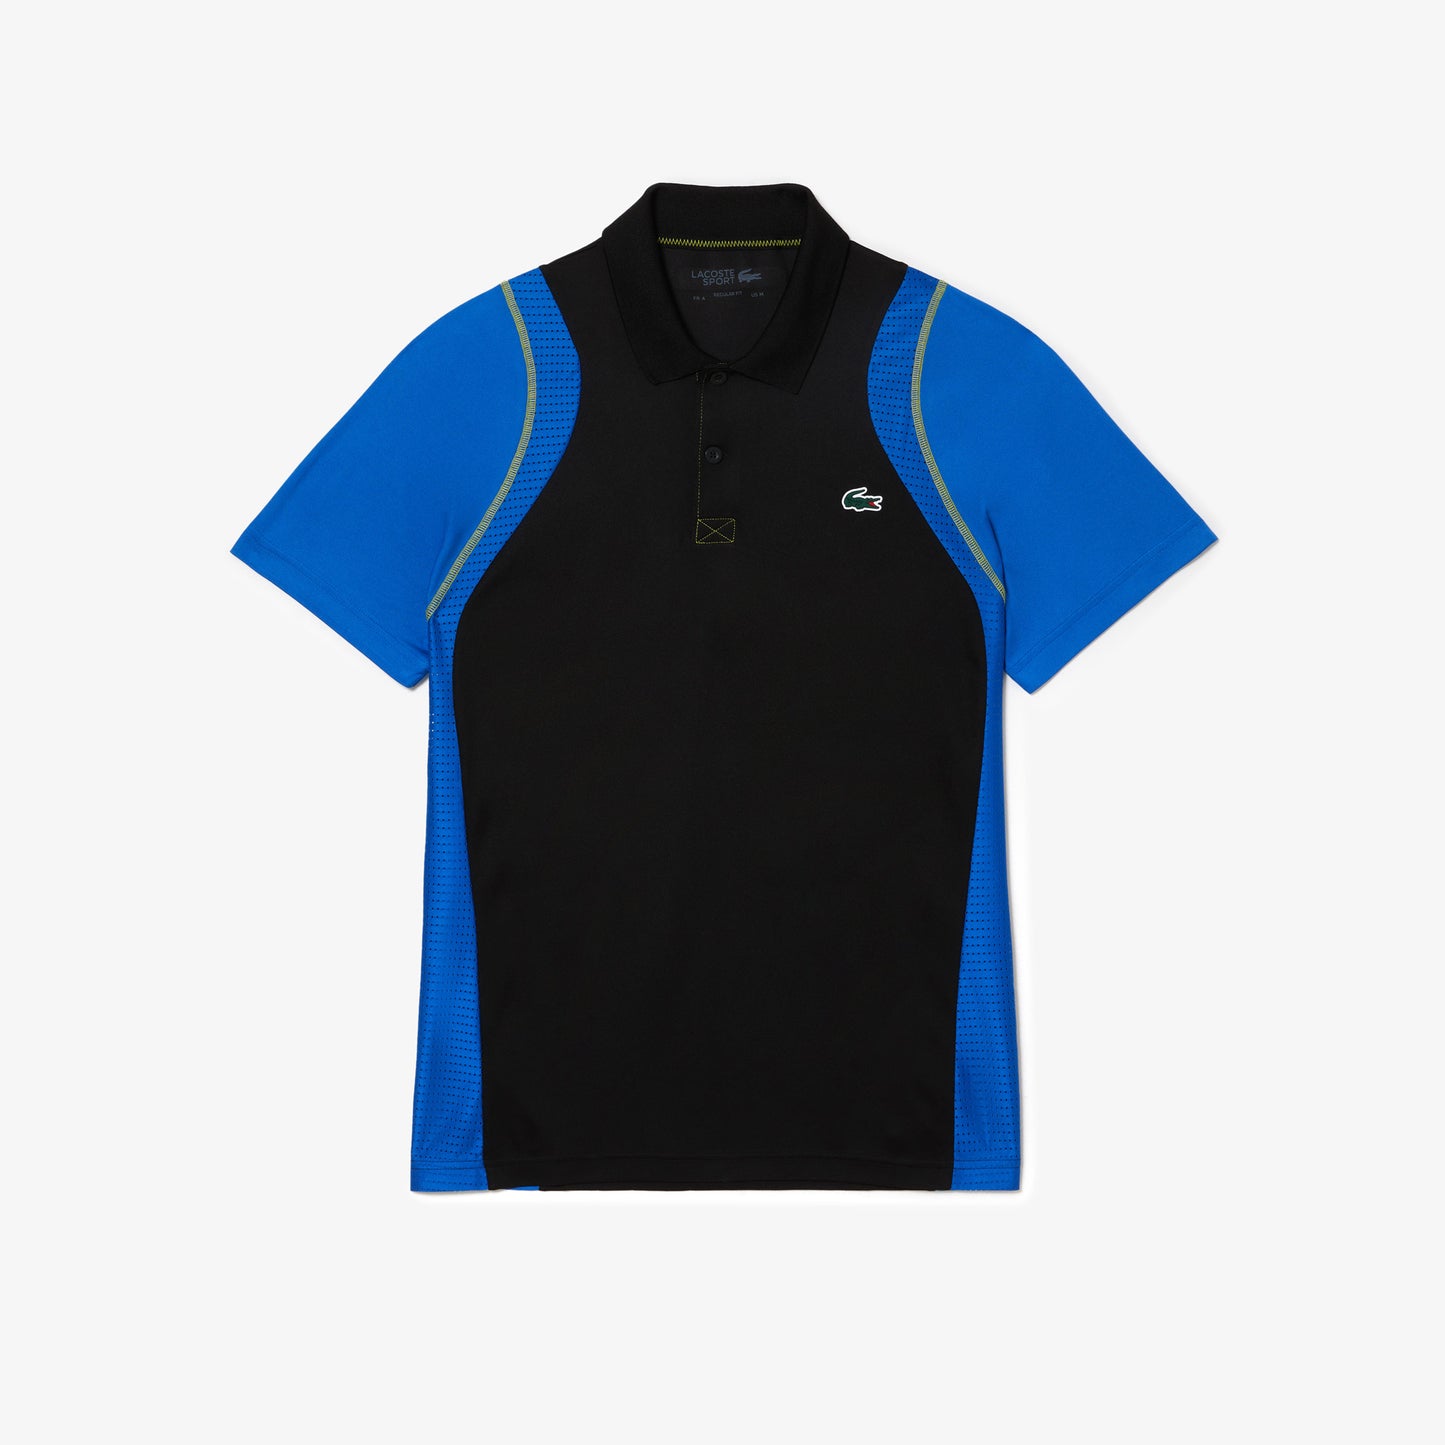 Men’s Lacoste Tennis Recycled Polyester Polo Shirt - DH5180